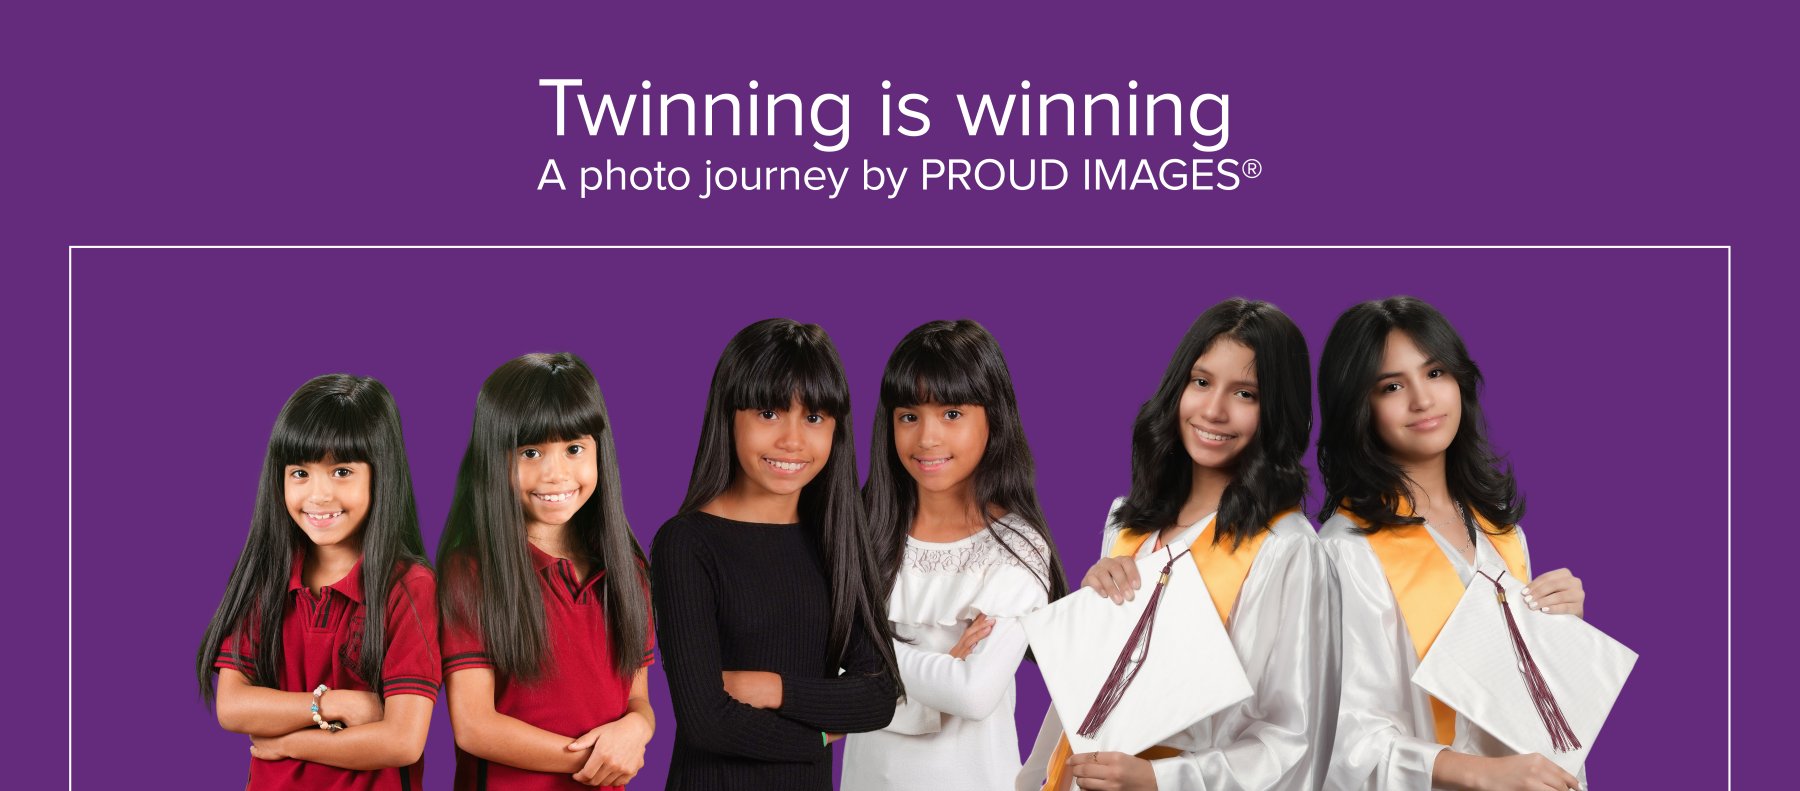 Twin Photos by Proud Images.jpg